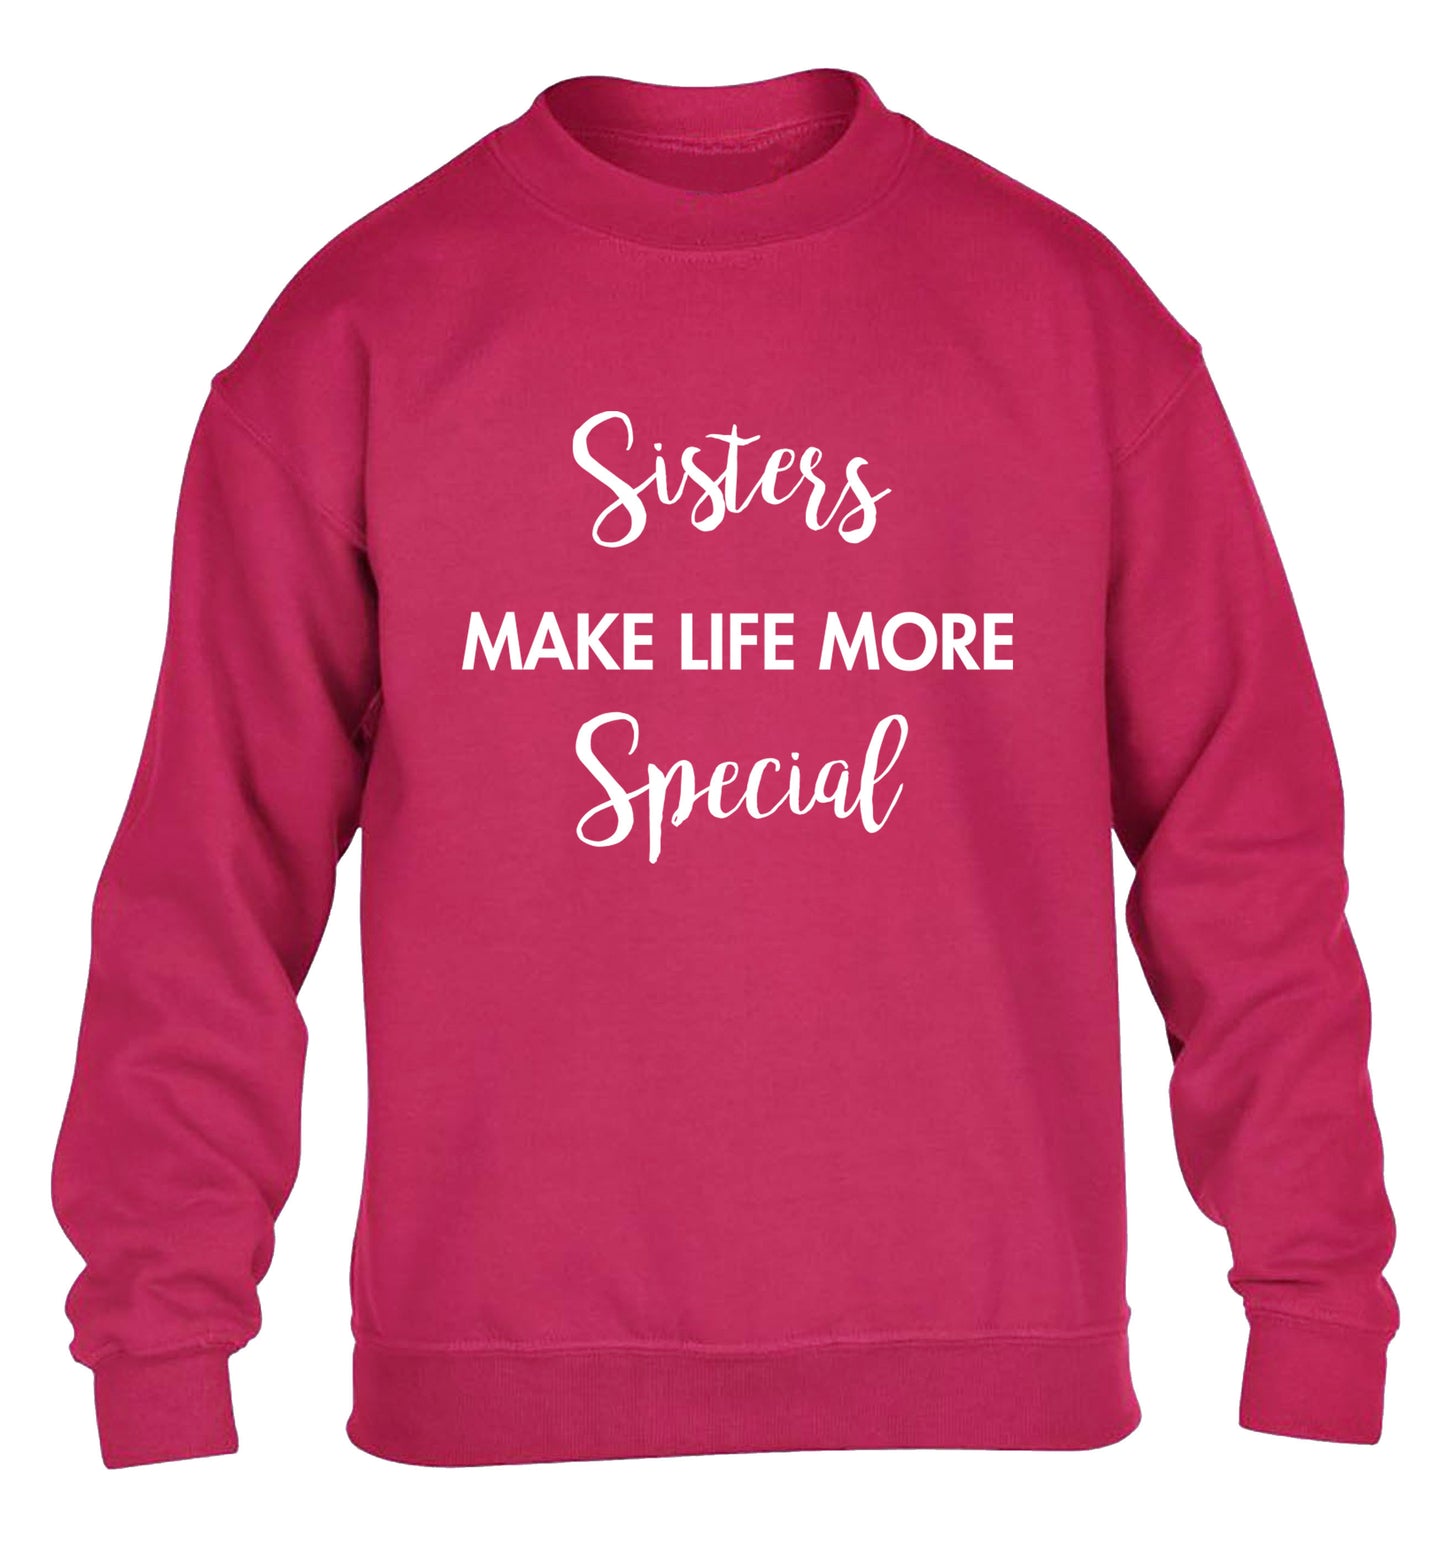 Sisters make life more special children's pink sweater 12-14 Years